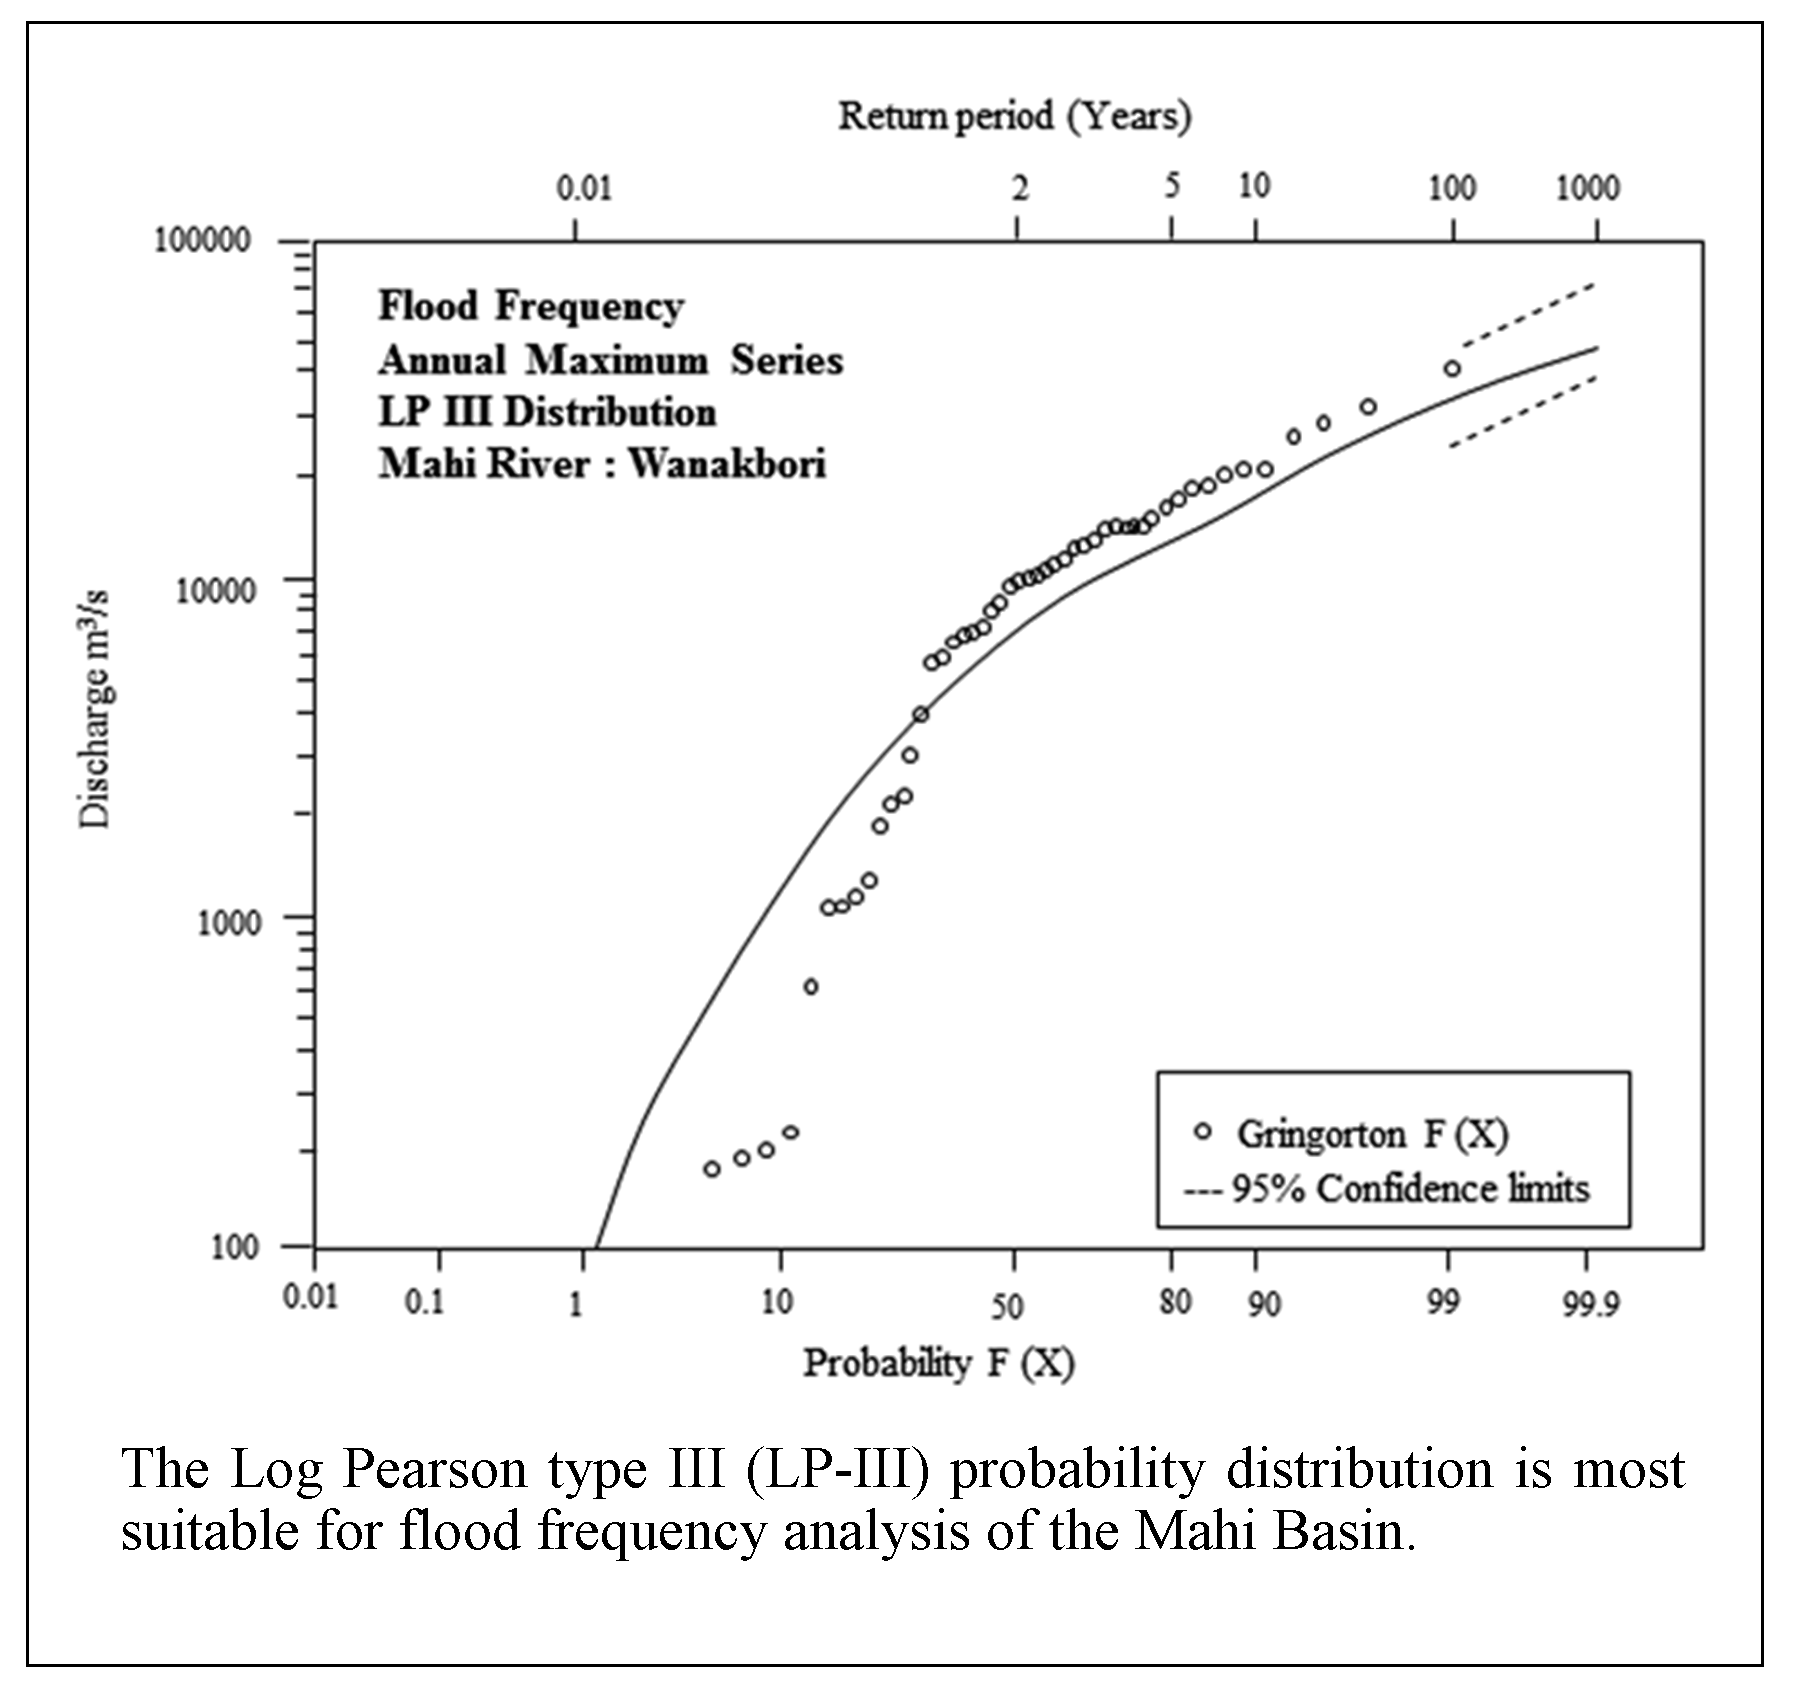 Flood Frequency Analysis of the Mahi Basin by Using Log Pearson Type III Probability Distribution